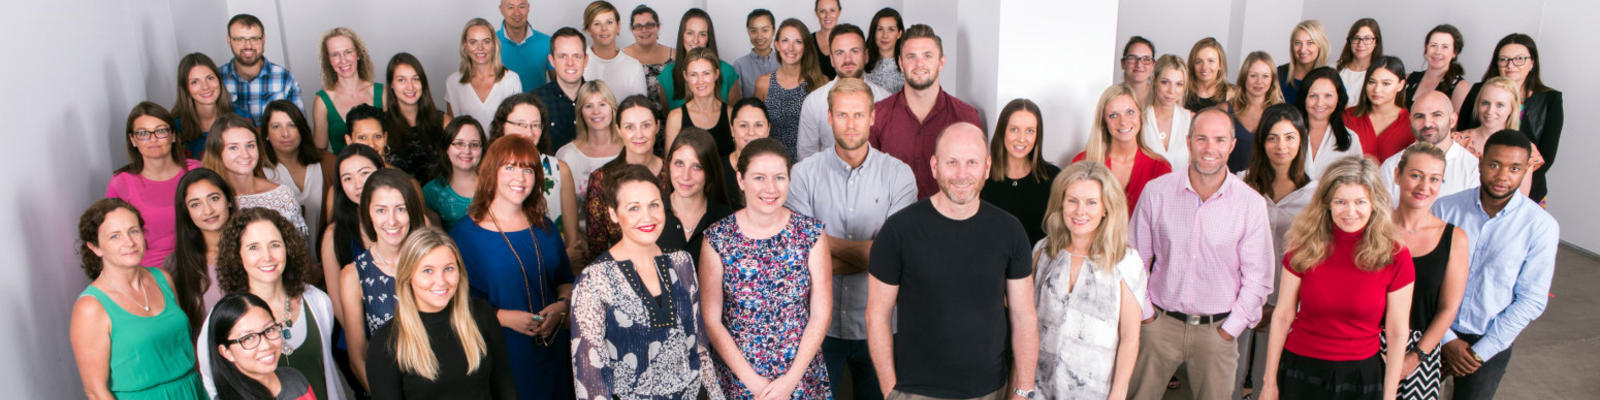 A company photo of the entire staff